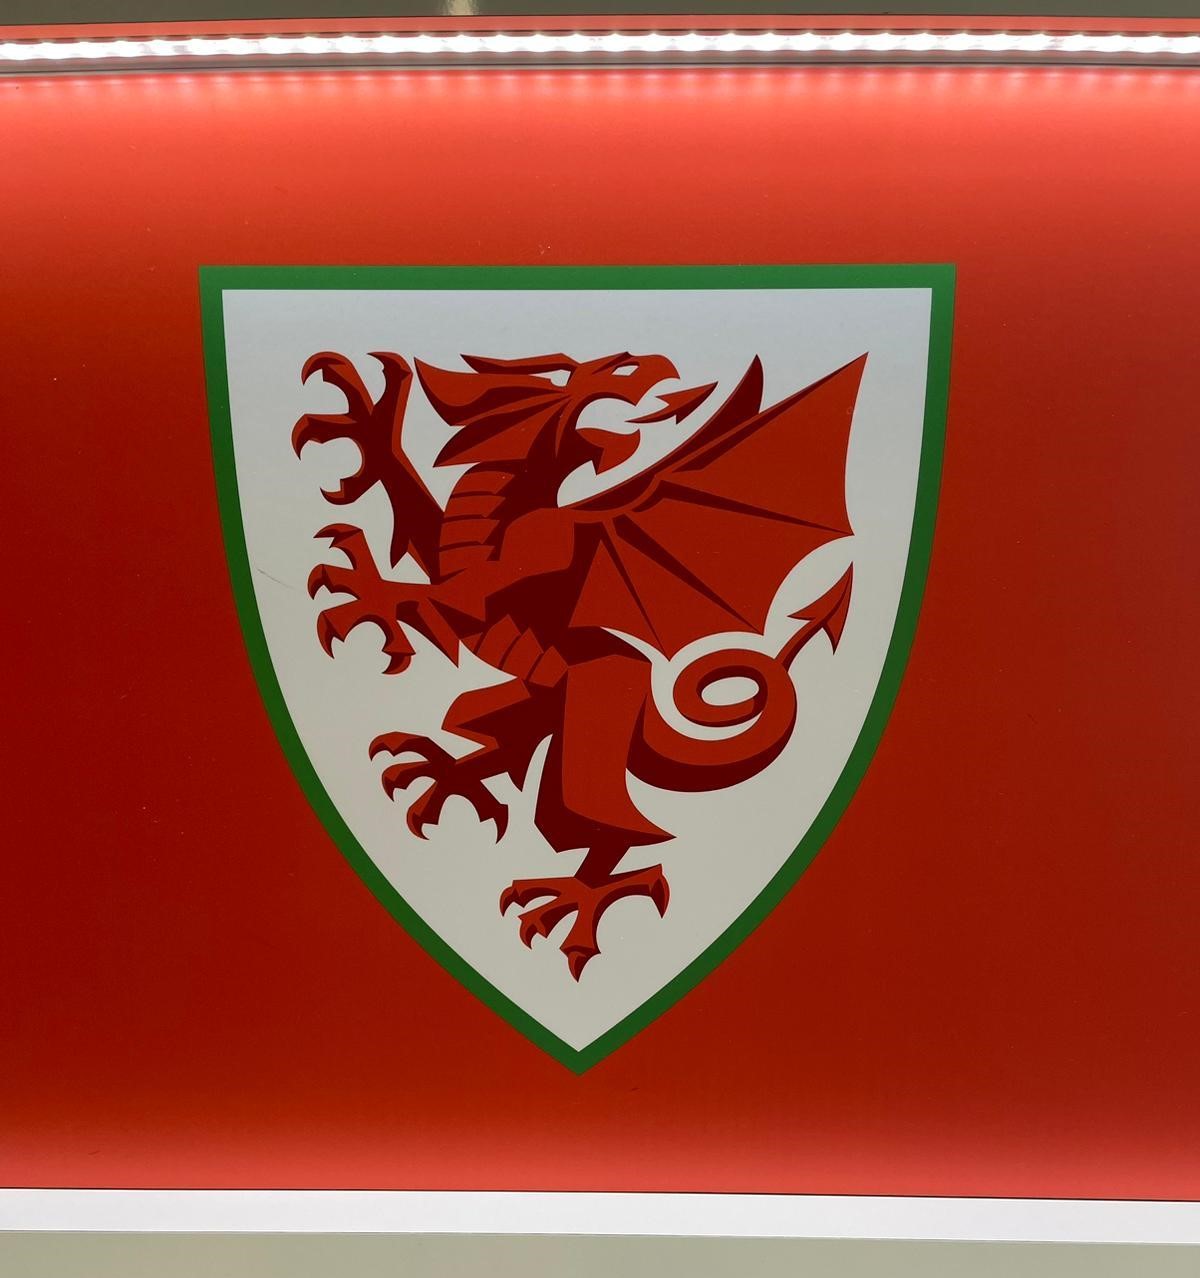 Empowering Young Voices: Children in Wales and FAW Launch New Project to Shape the Future of Welsh Football